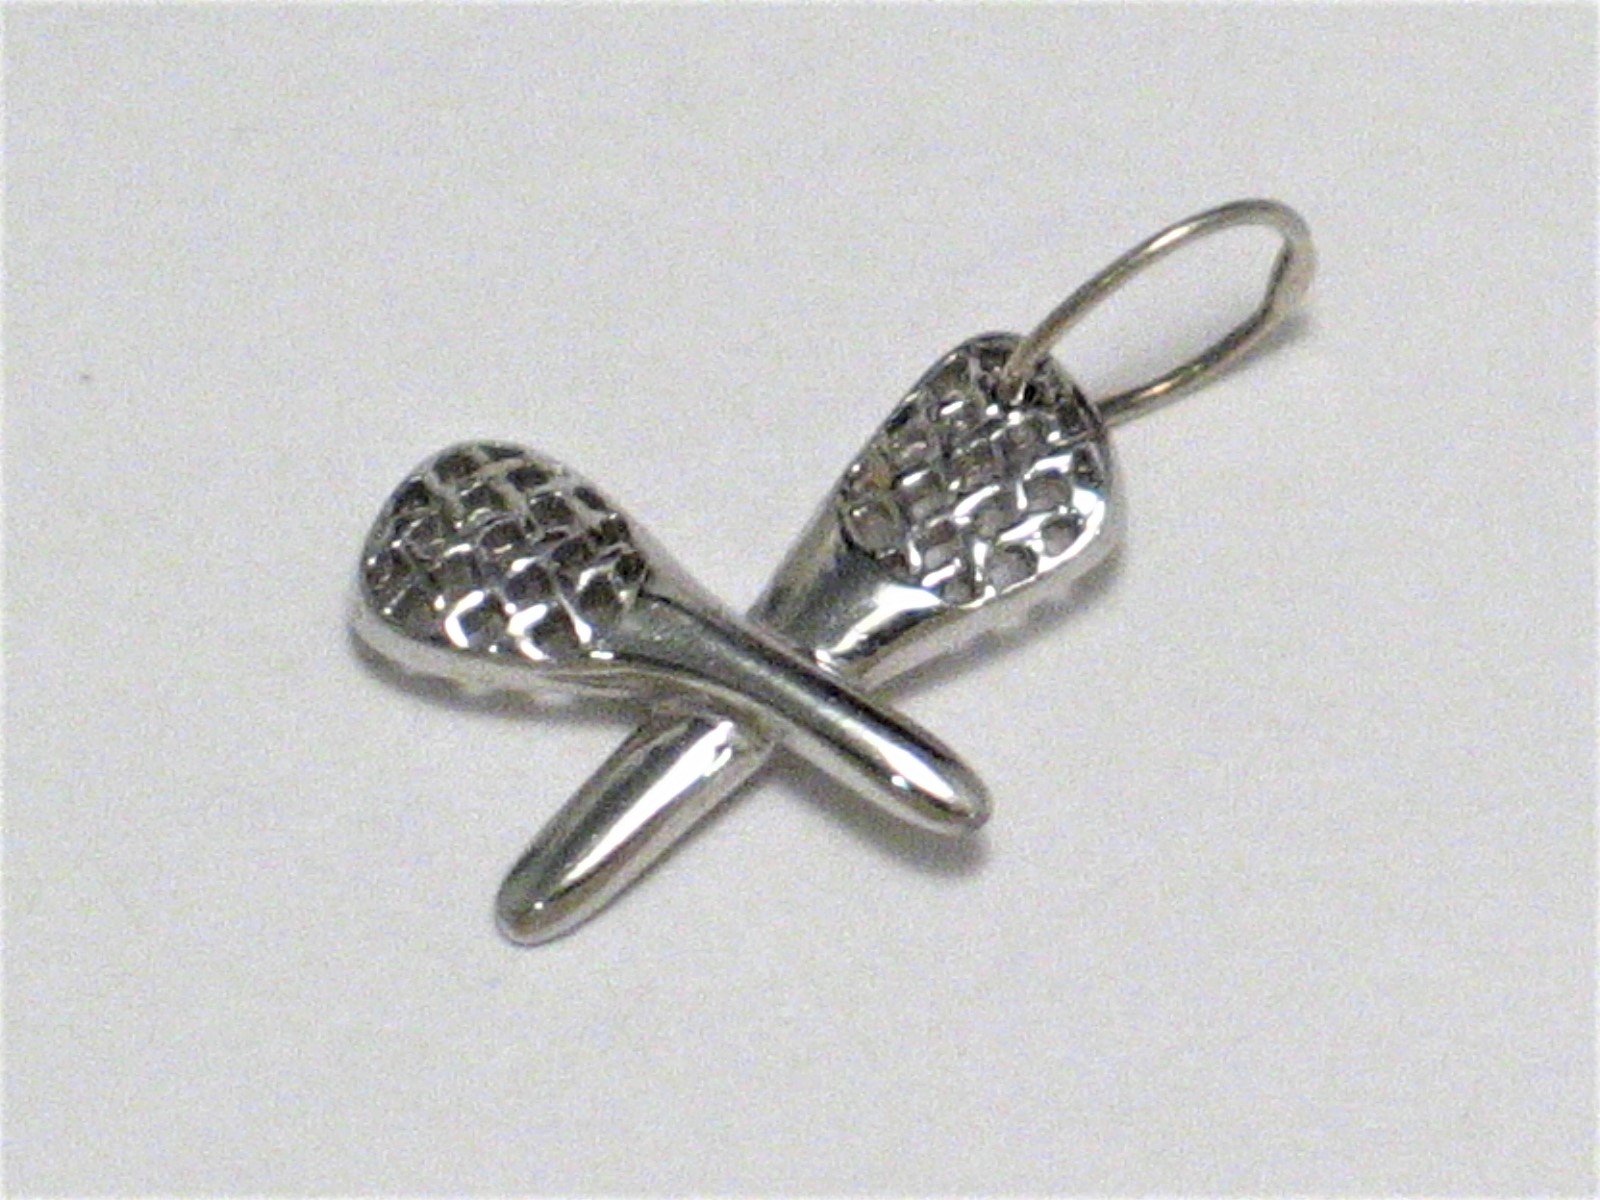 Used Jewelry > Charm | Sterling Silver Dainty Crossed Lacrosse Sticks Charm Pendant